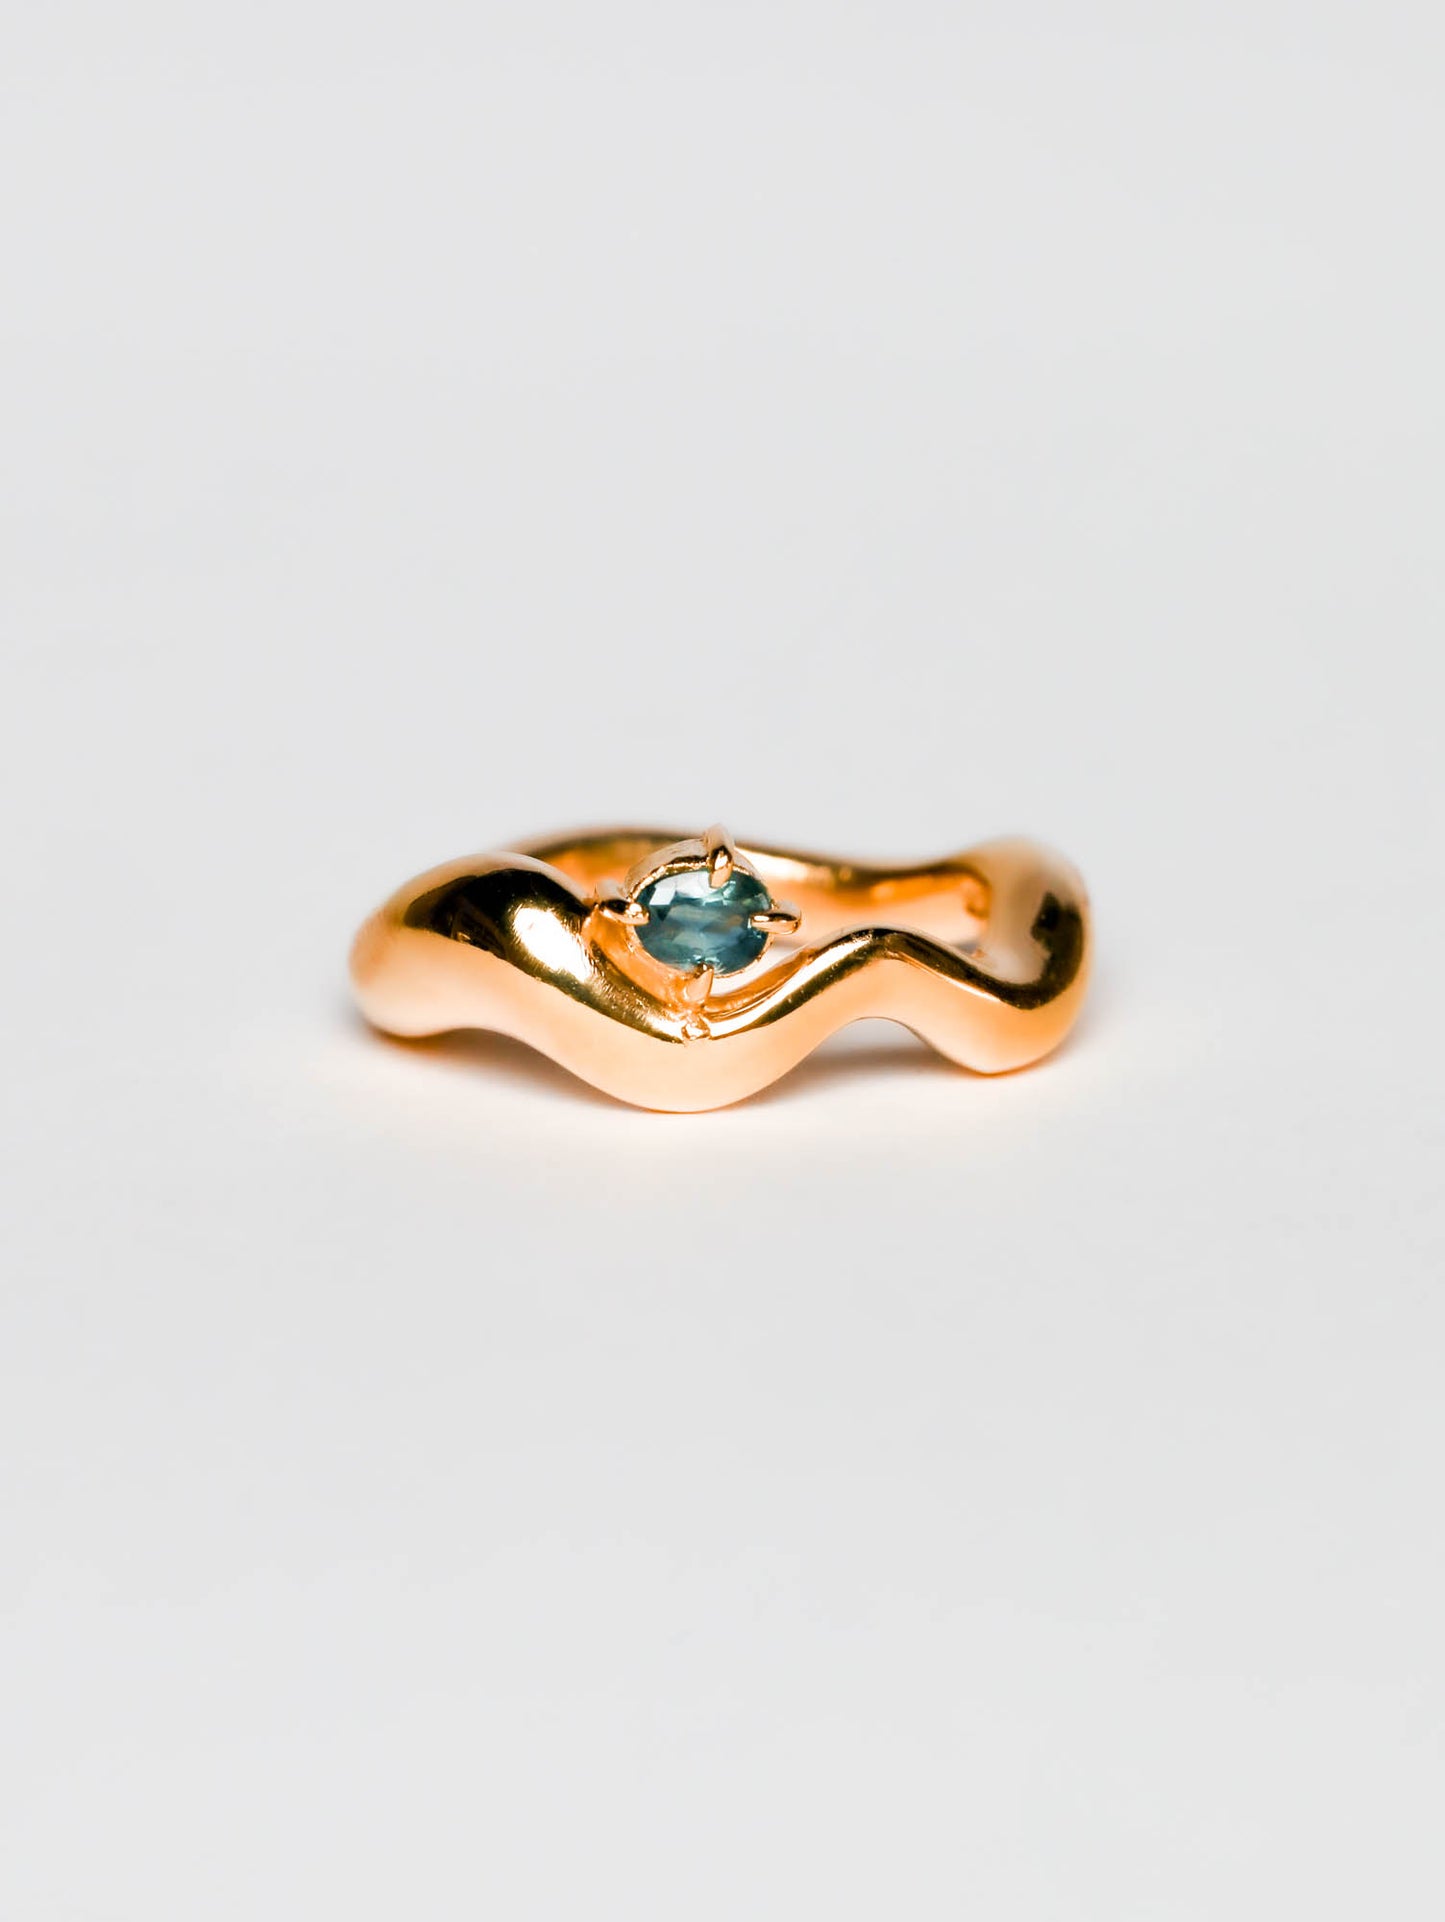 Wave Ring Gold with single Sapphire Stone # 1 | Size 6